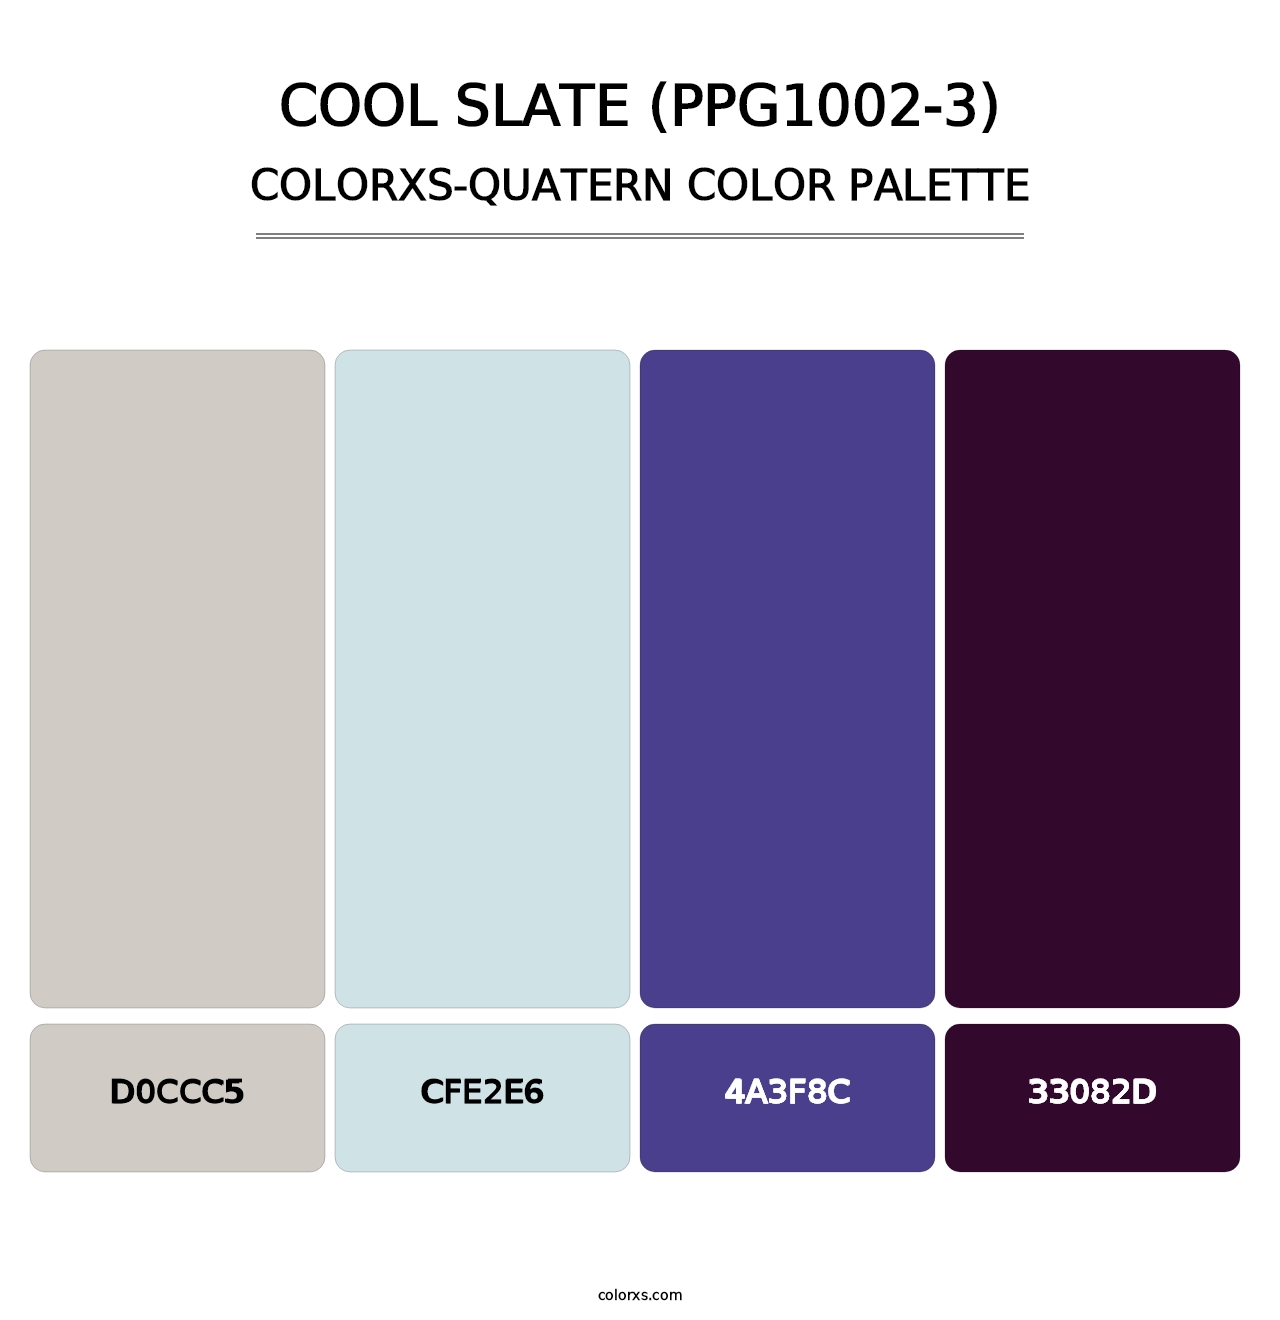 Cool Slate (PPG1002-3) - Colorxs Quatern Palette